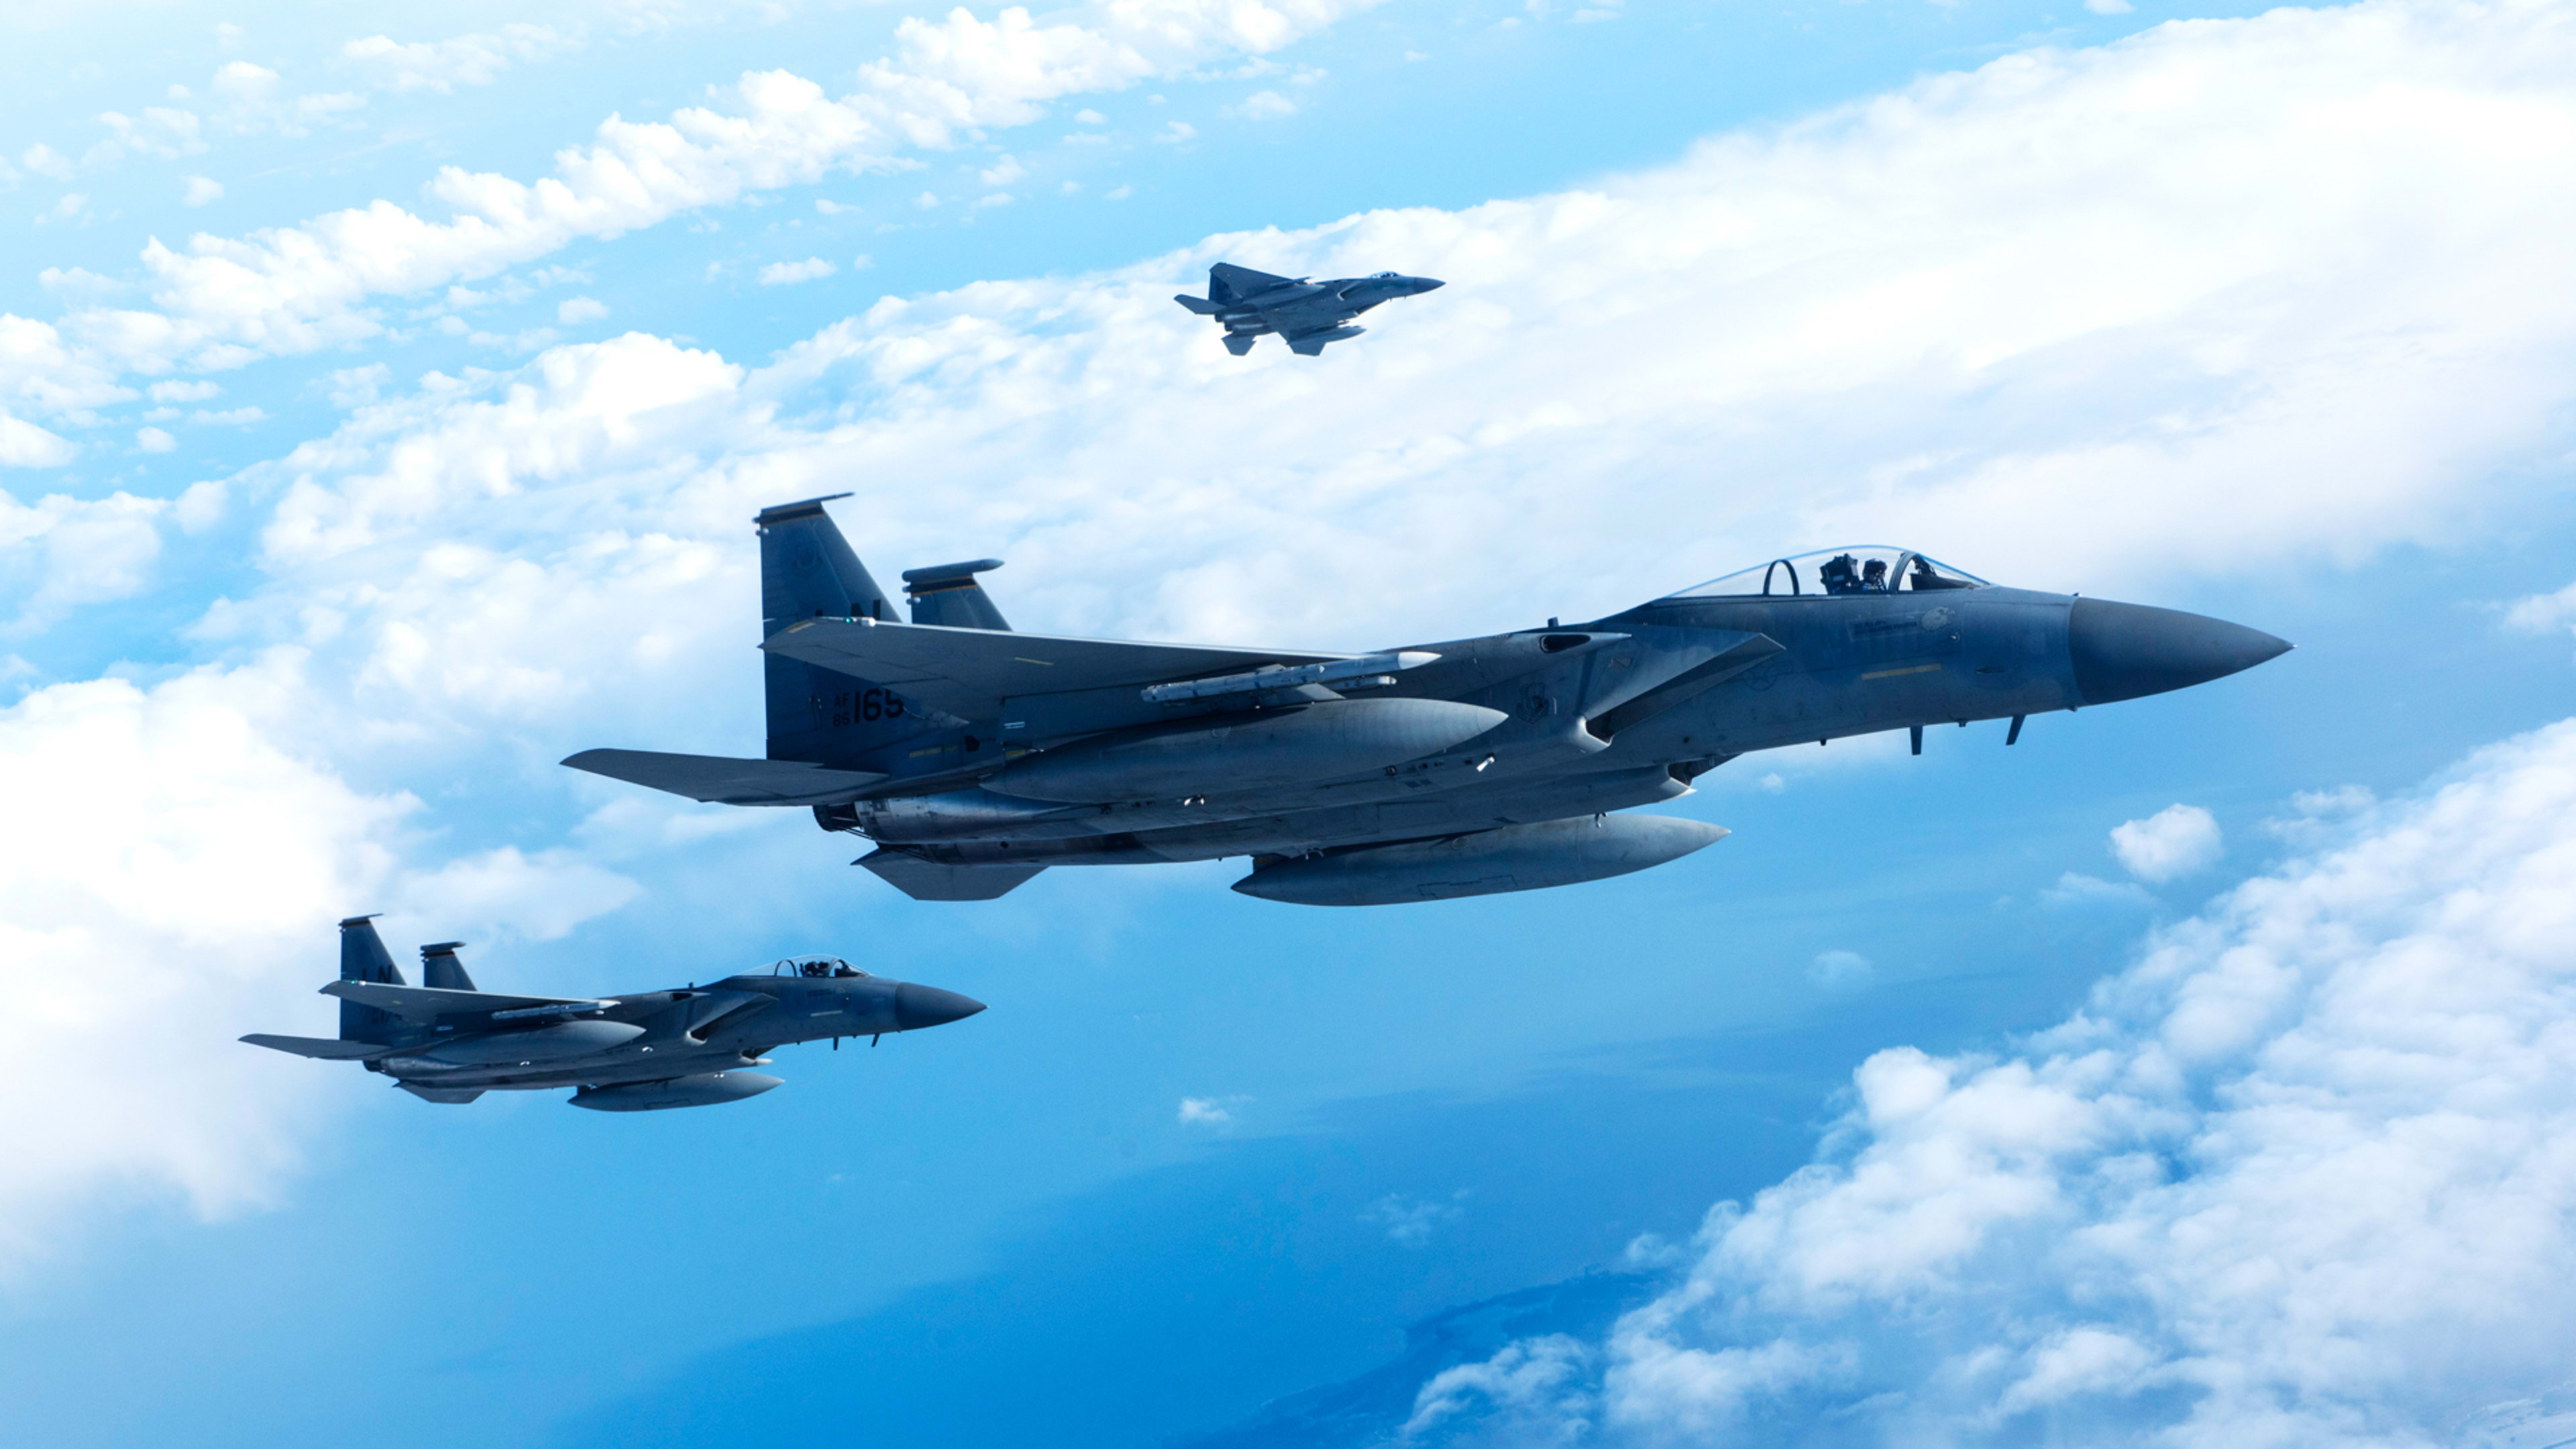 Why the Air Force has its own venture capital fund